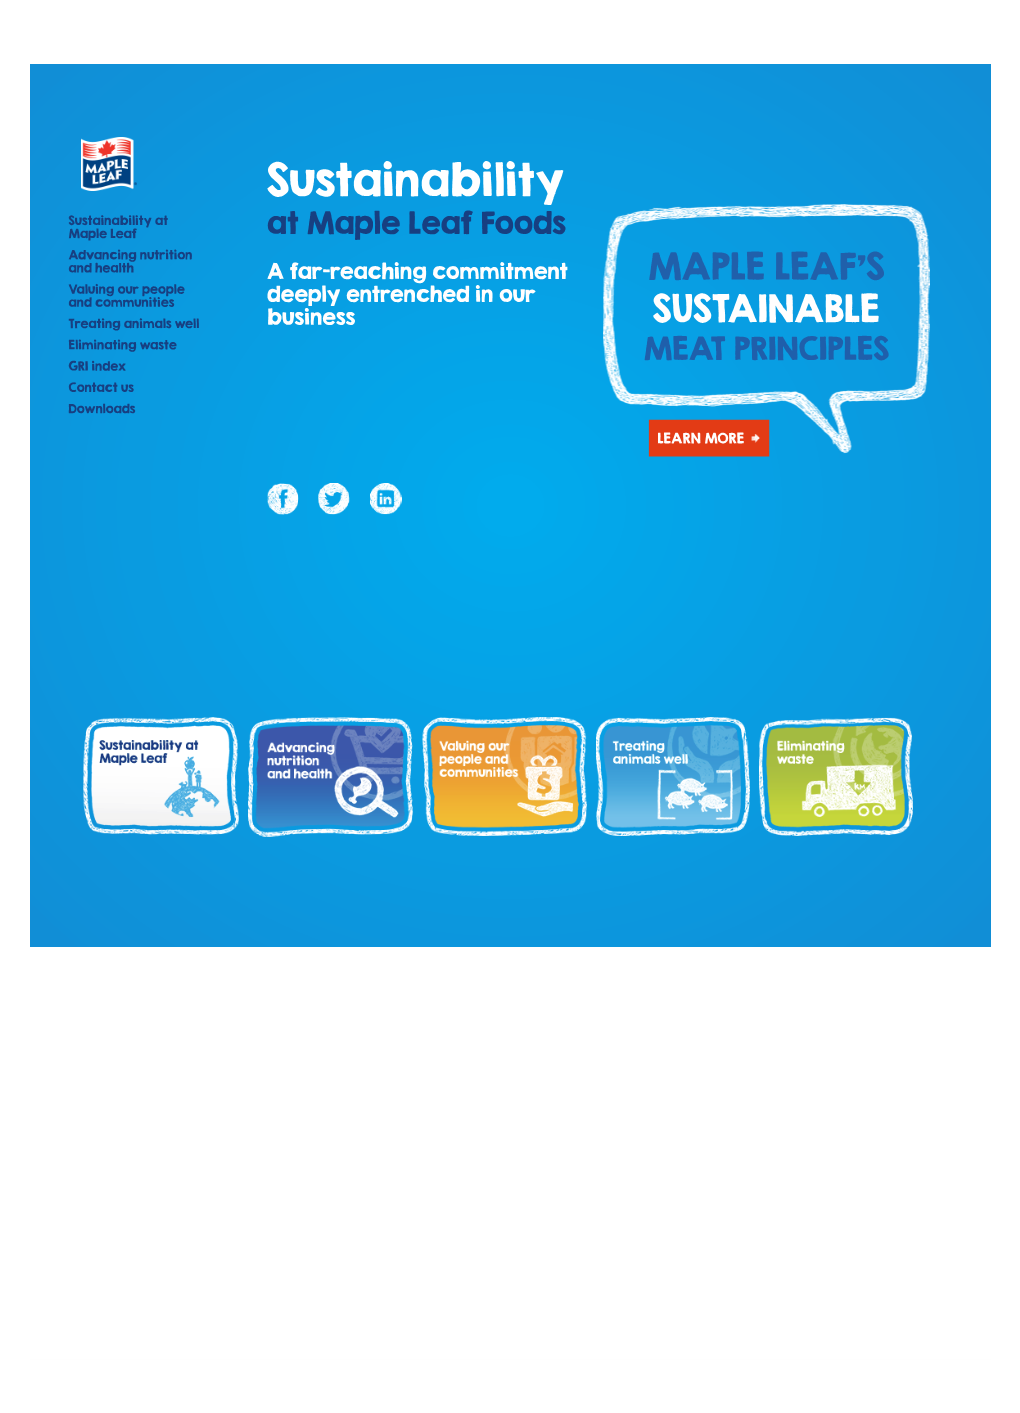 Maple Leaf Foods 2016 Sustainability Report